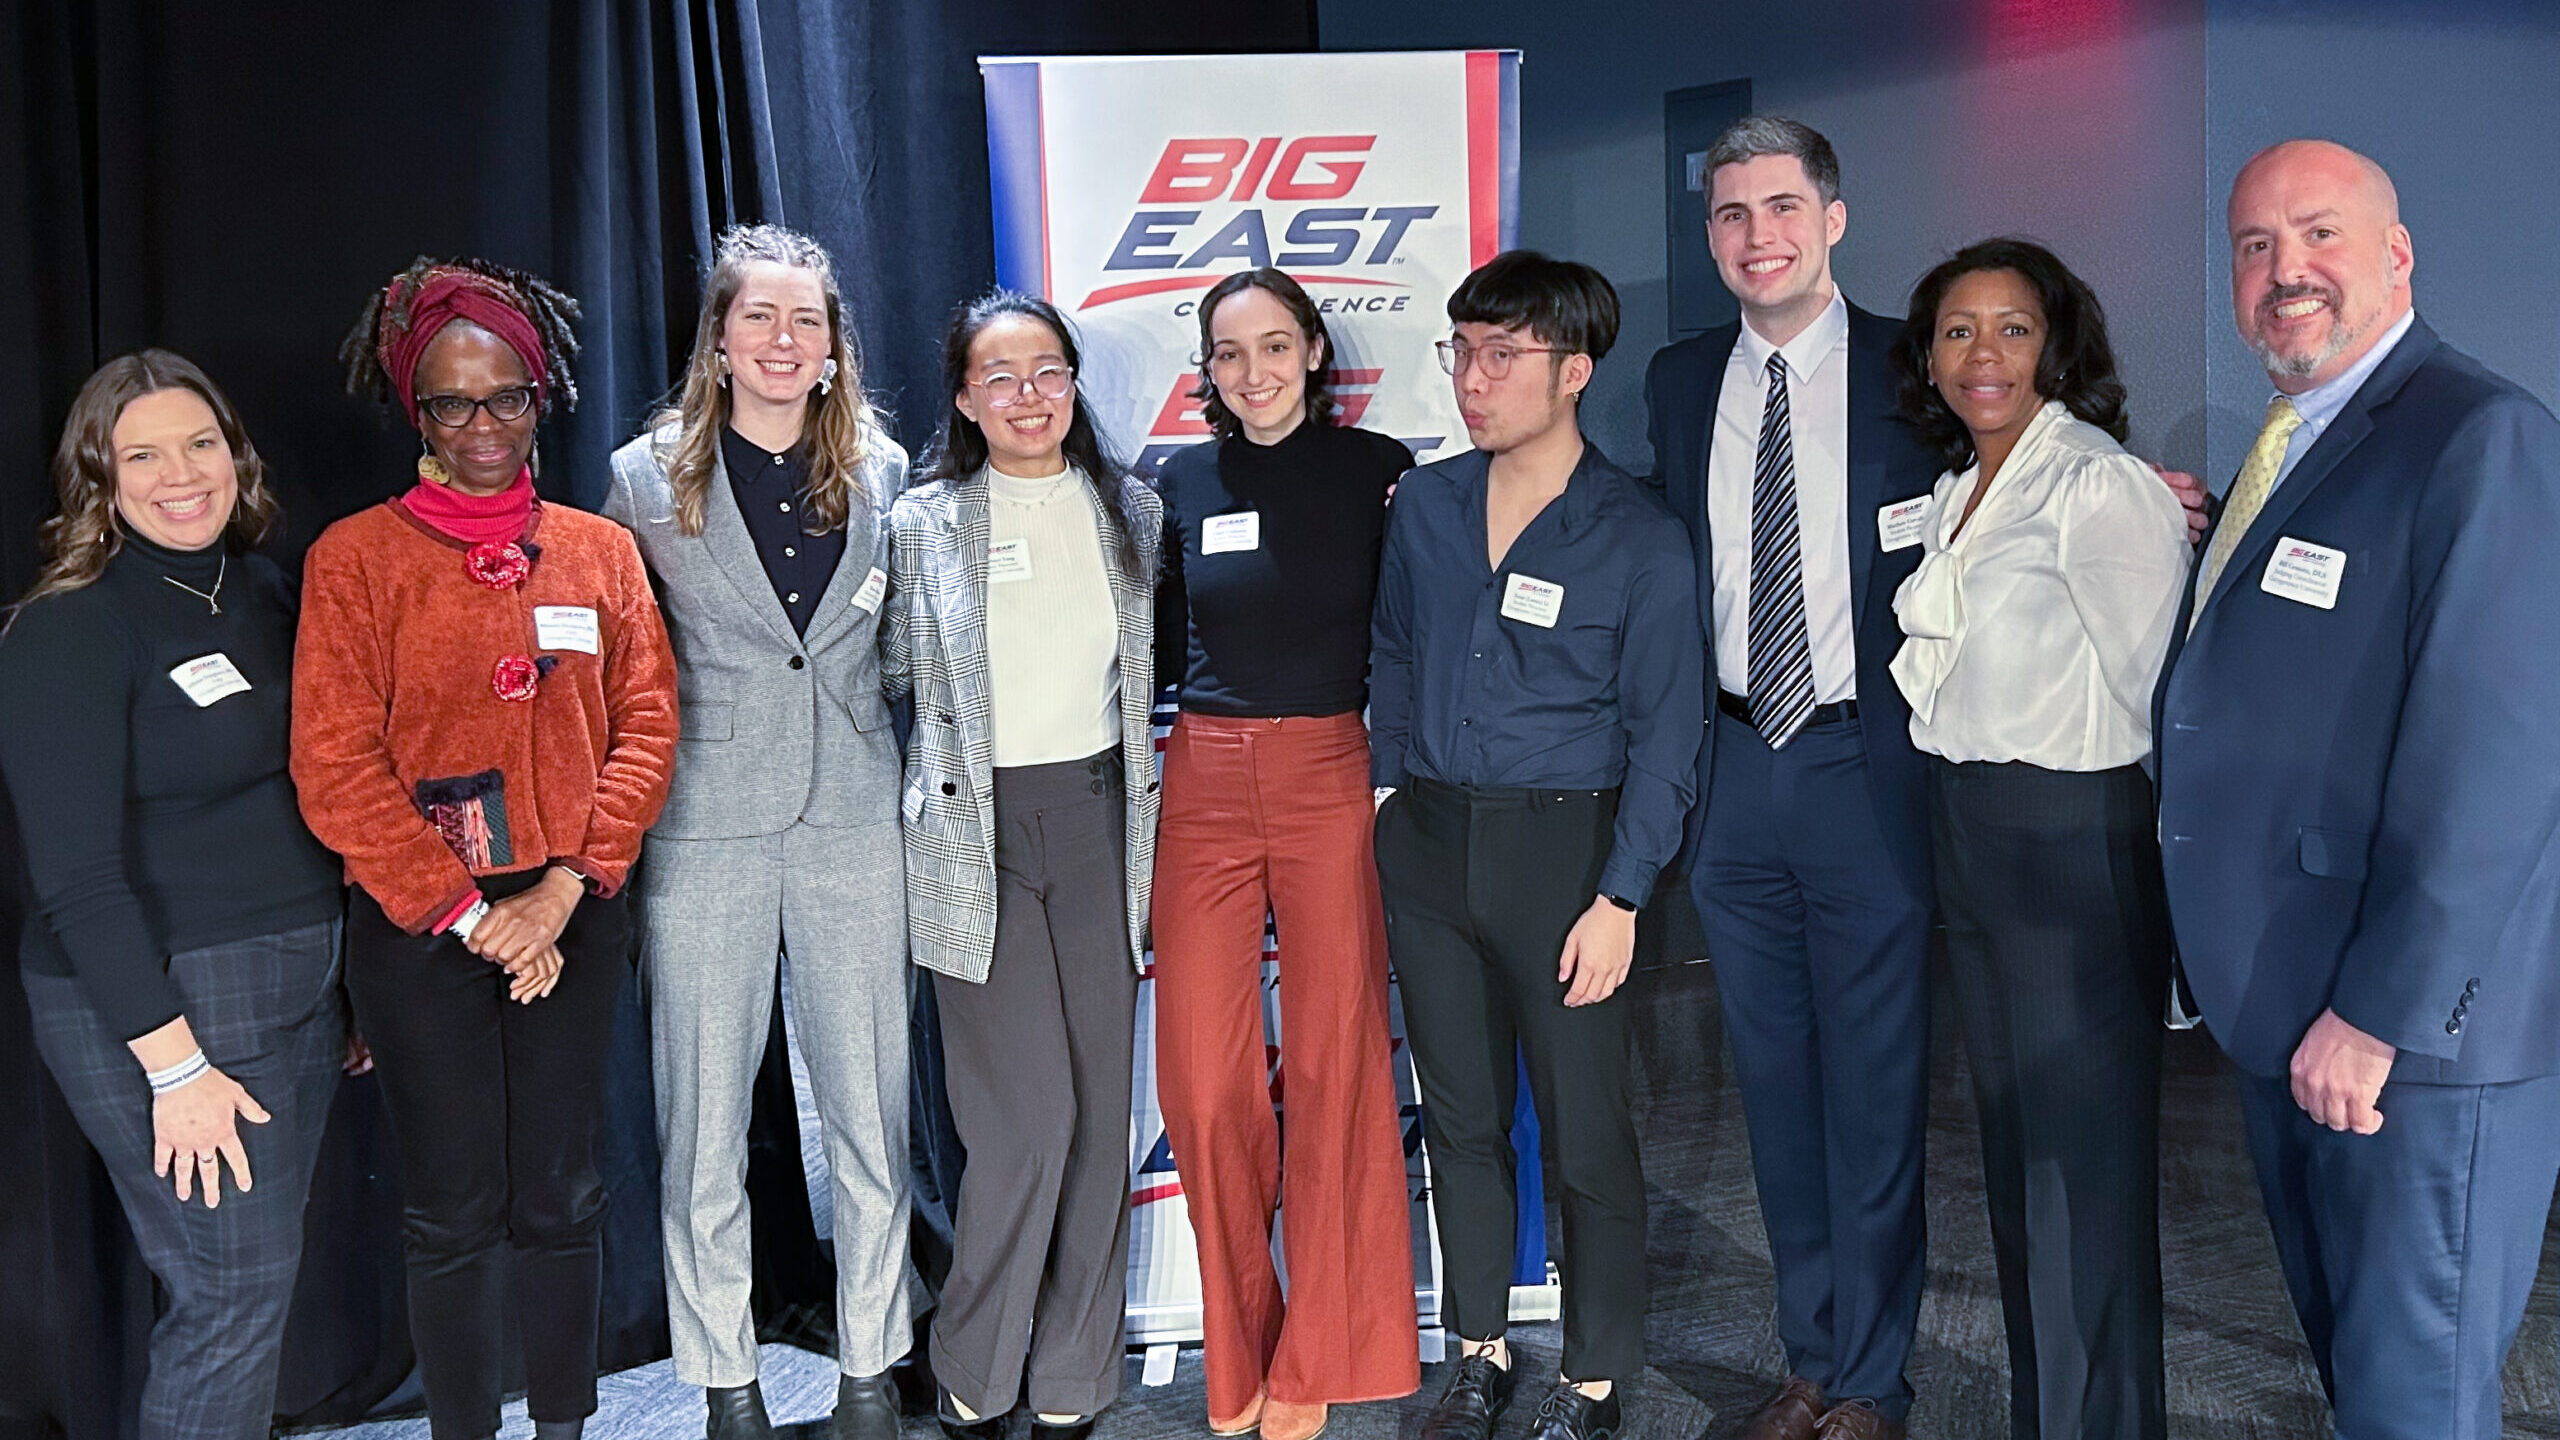 A group of students in formal attire stand in front of a Big East banner.